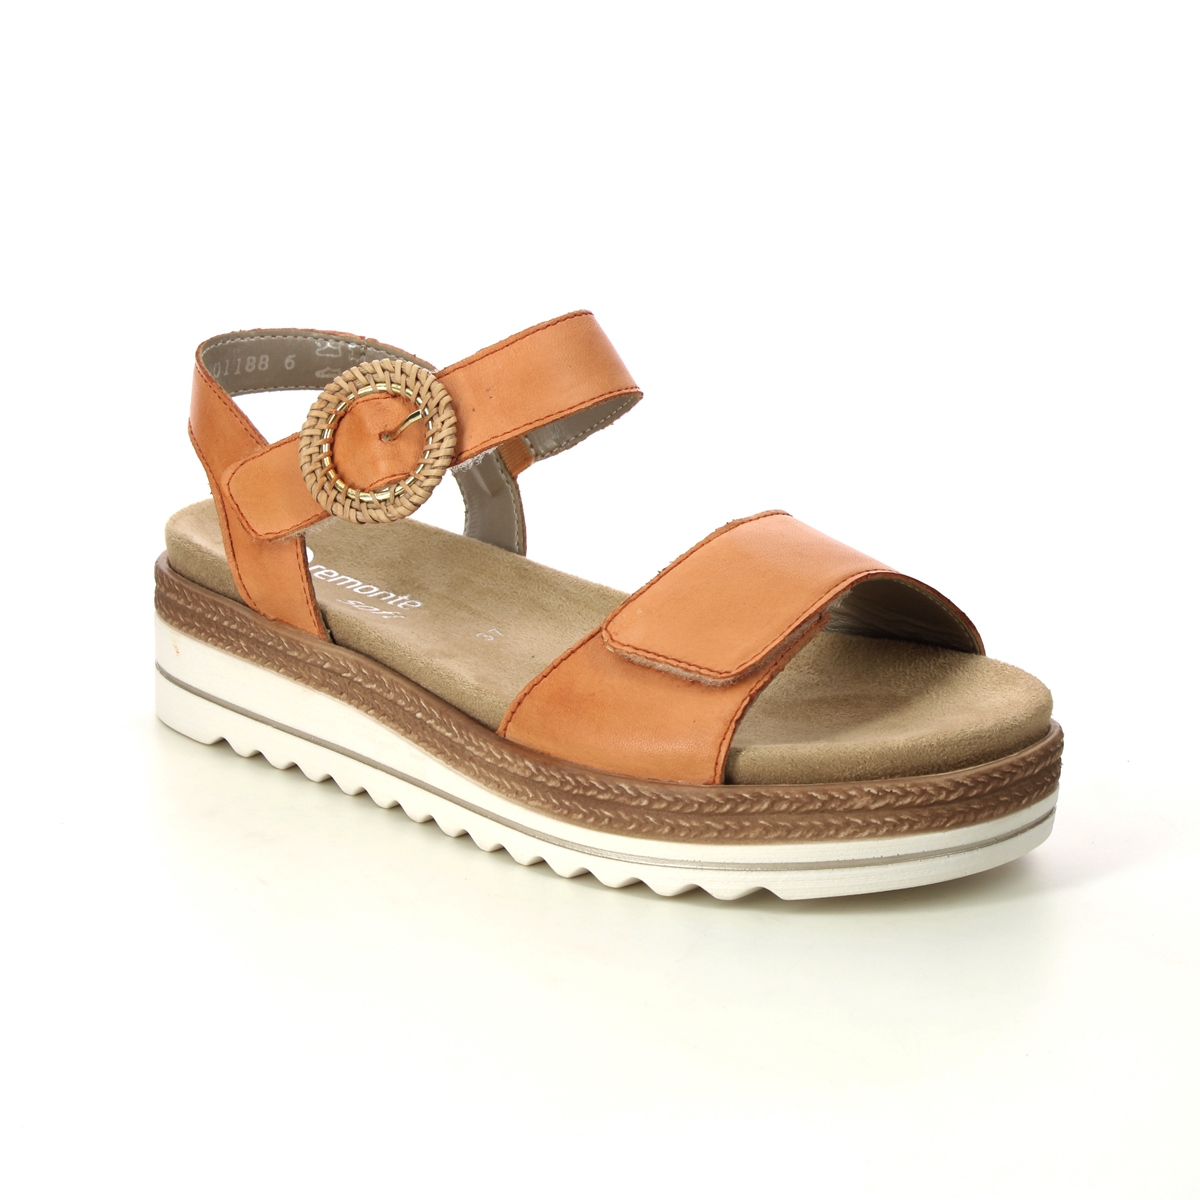 Remonte D0Q52-38 Bily  Flatform Orange Leather Womens Wedge Sandals in a Plain Leather in Size 38